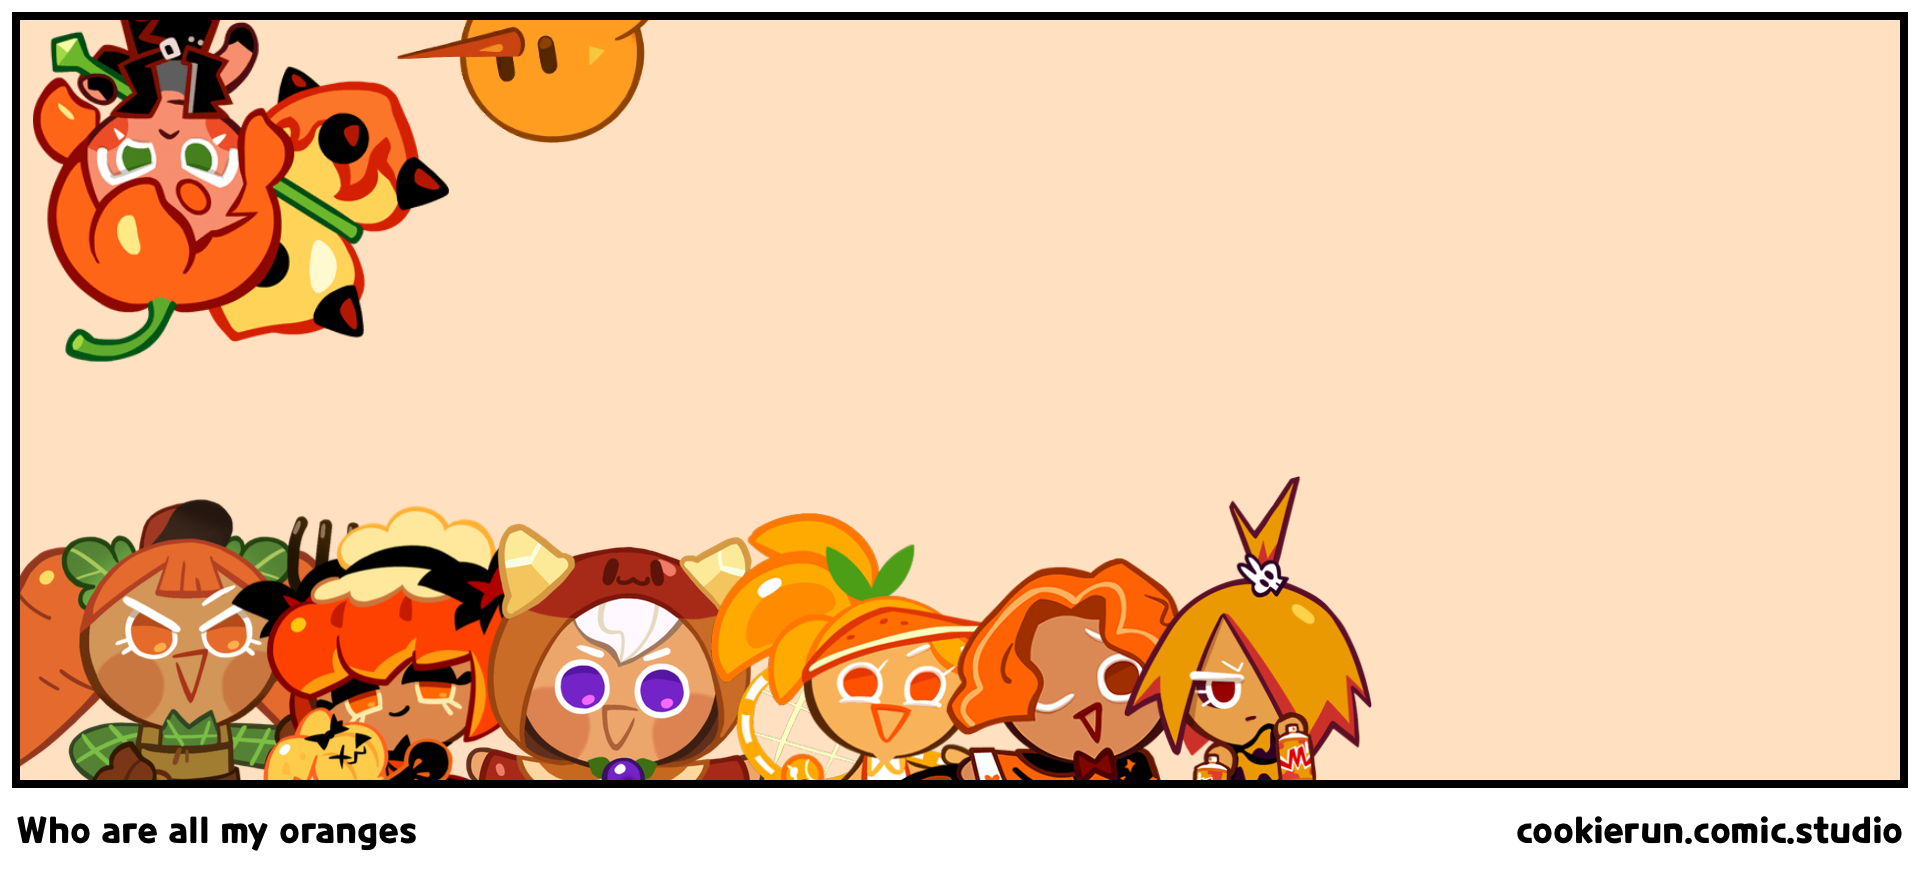 Who are all my oranges